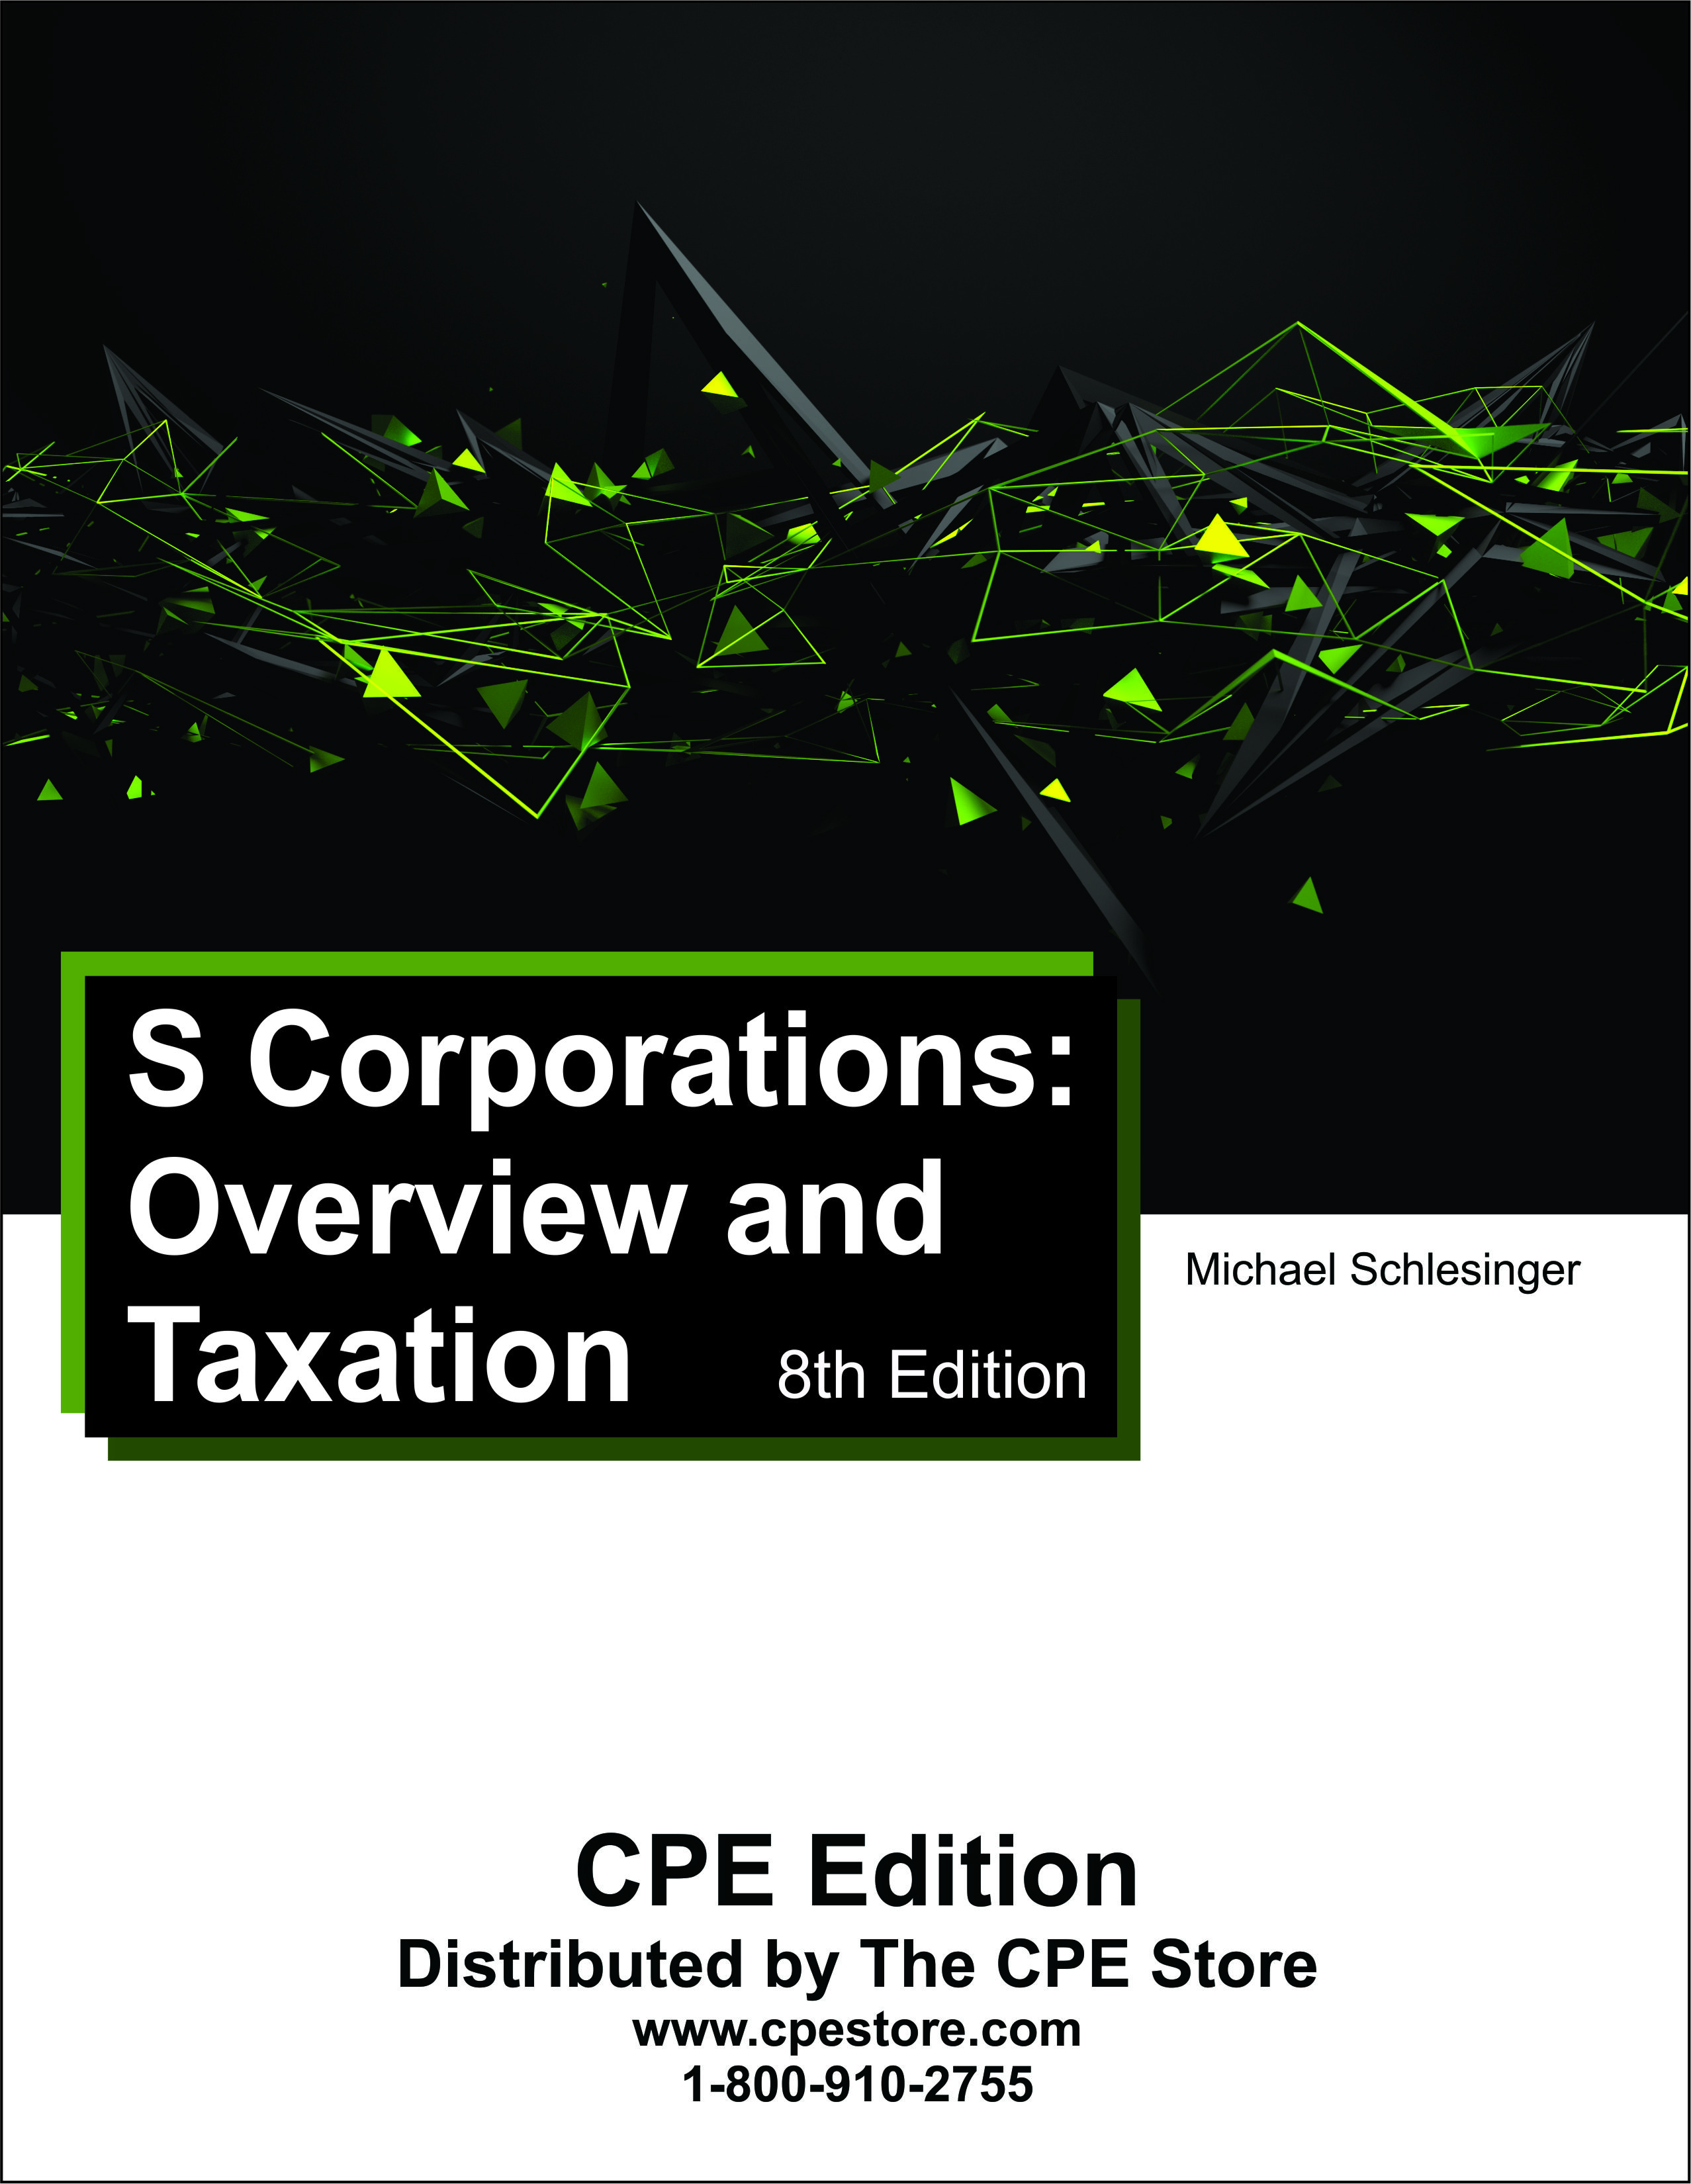 S Corporations: Overview and Taxation